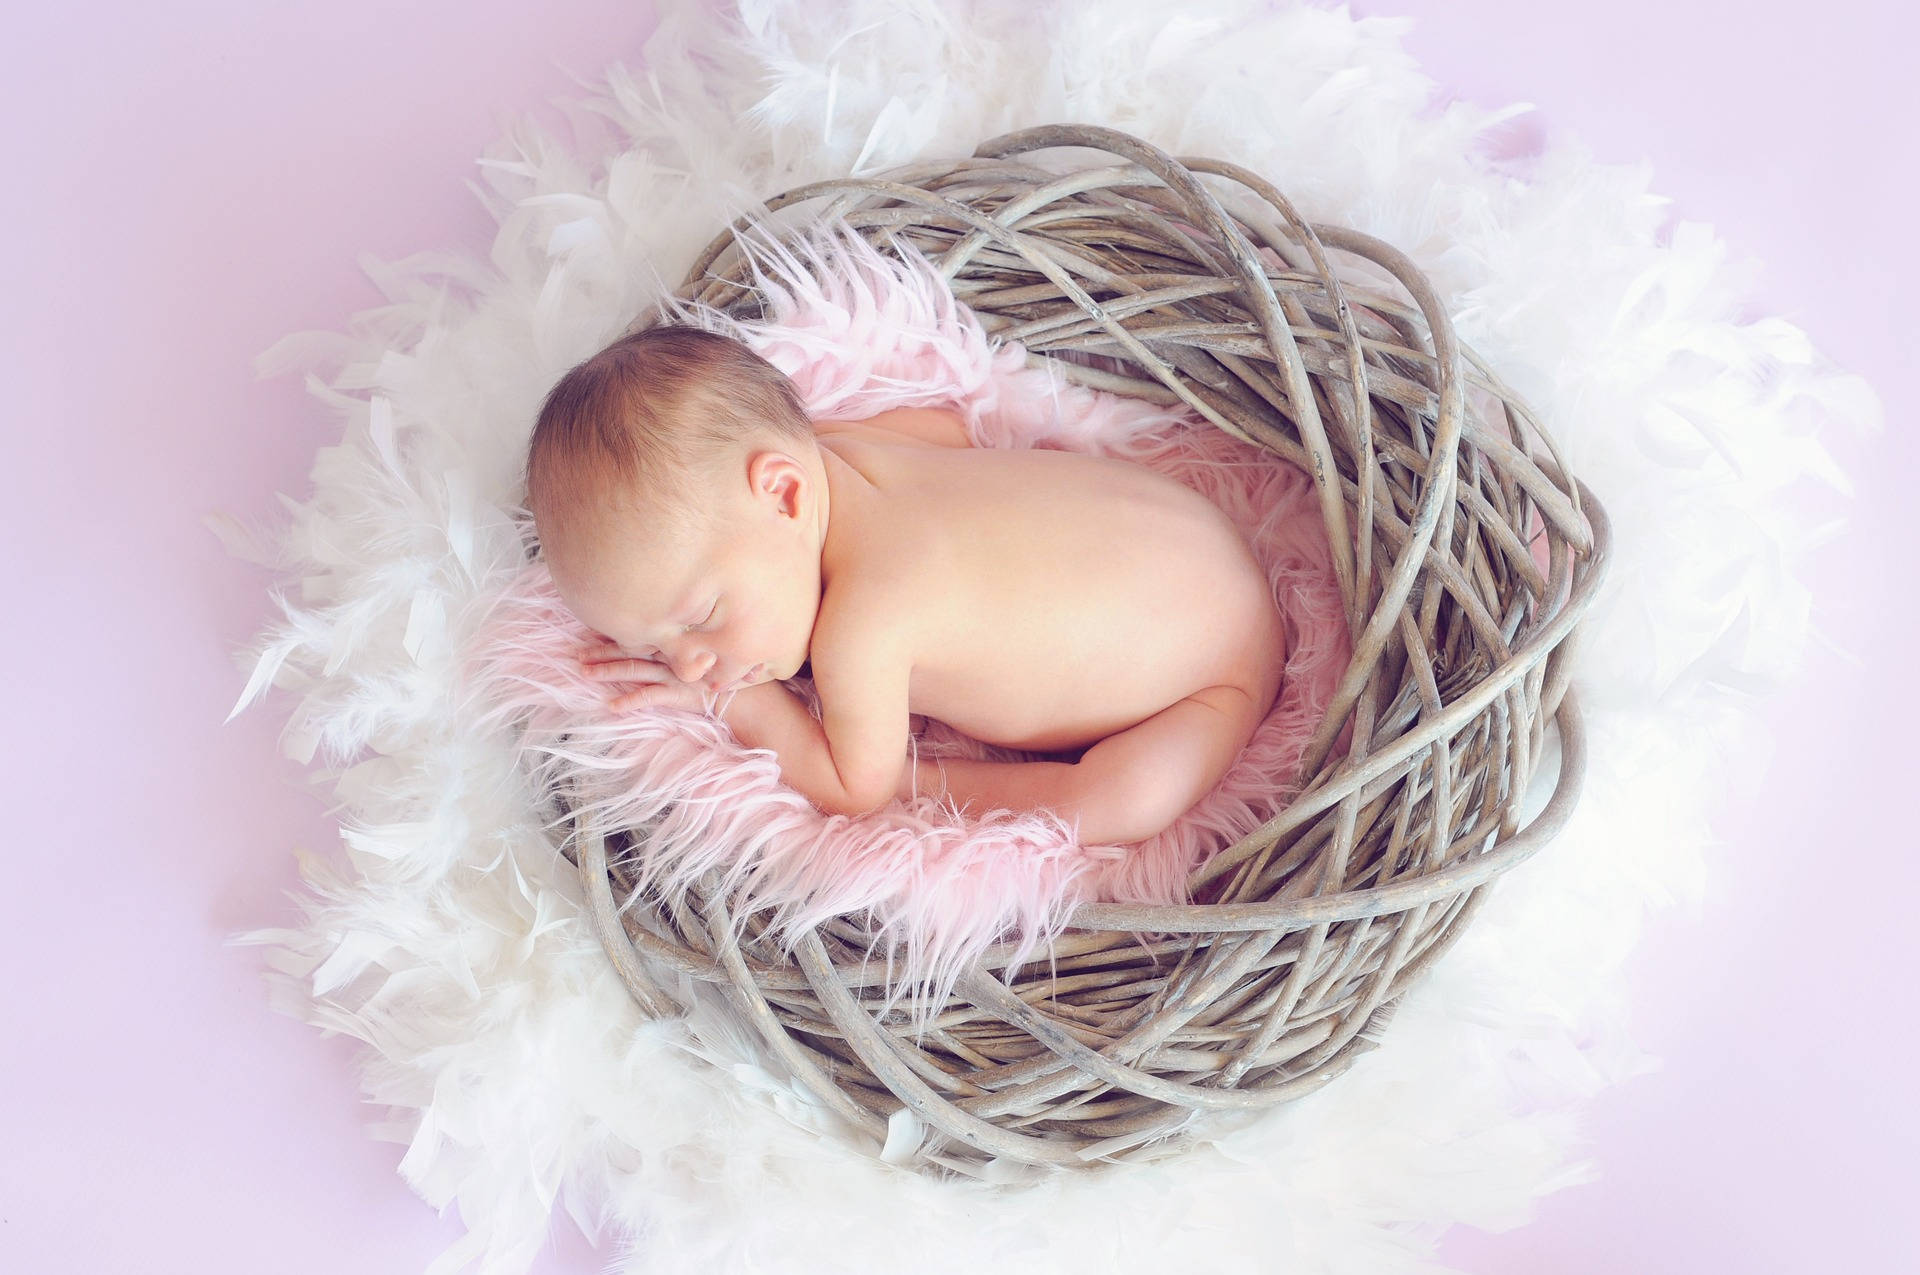 Very Cute Baby On Feathery Nest Wallpaper